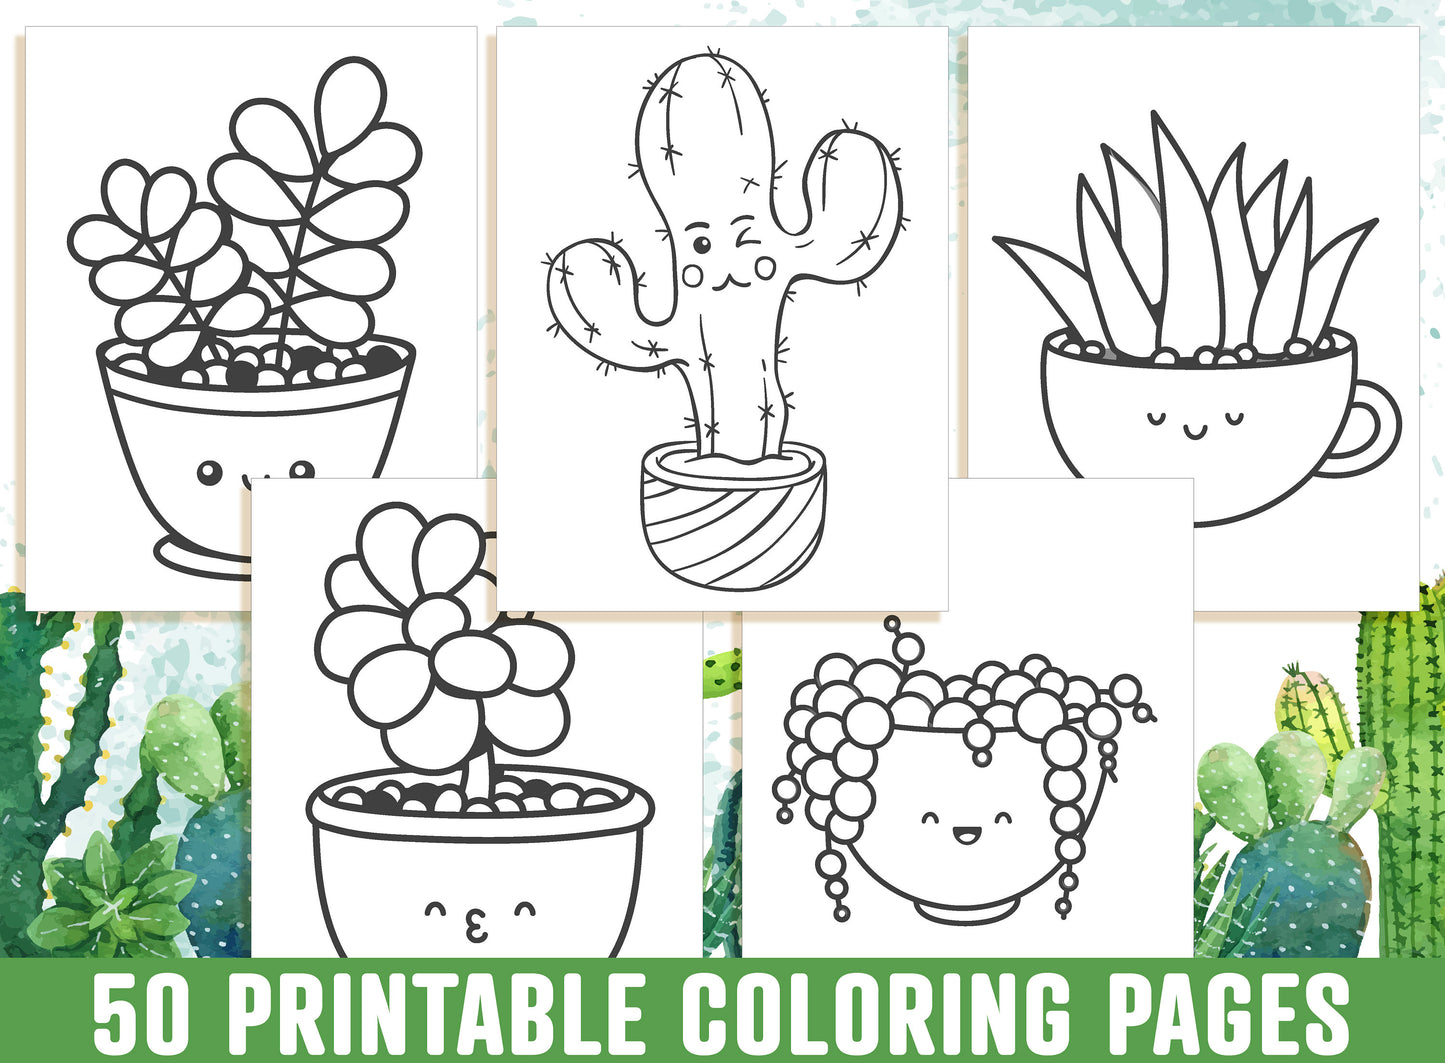 Cactus Coloring Pages - A Cute Coloring Book with 50 Adorable Cactus & Succulents Coloring Pages - A Great Gift for Kids, Boys and Girls.